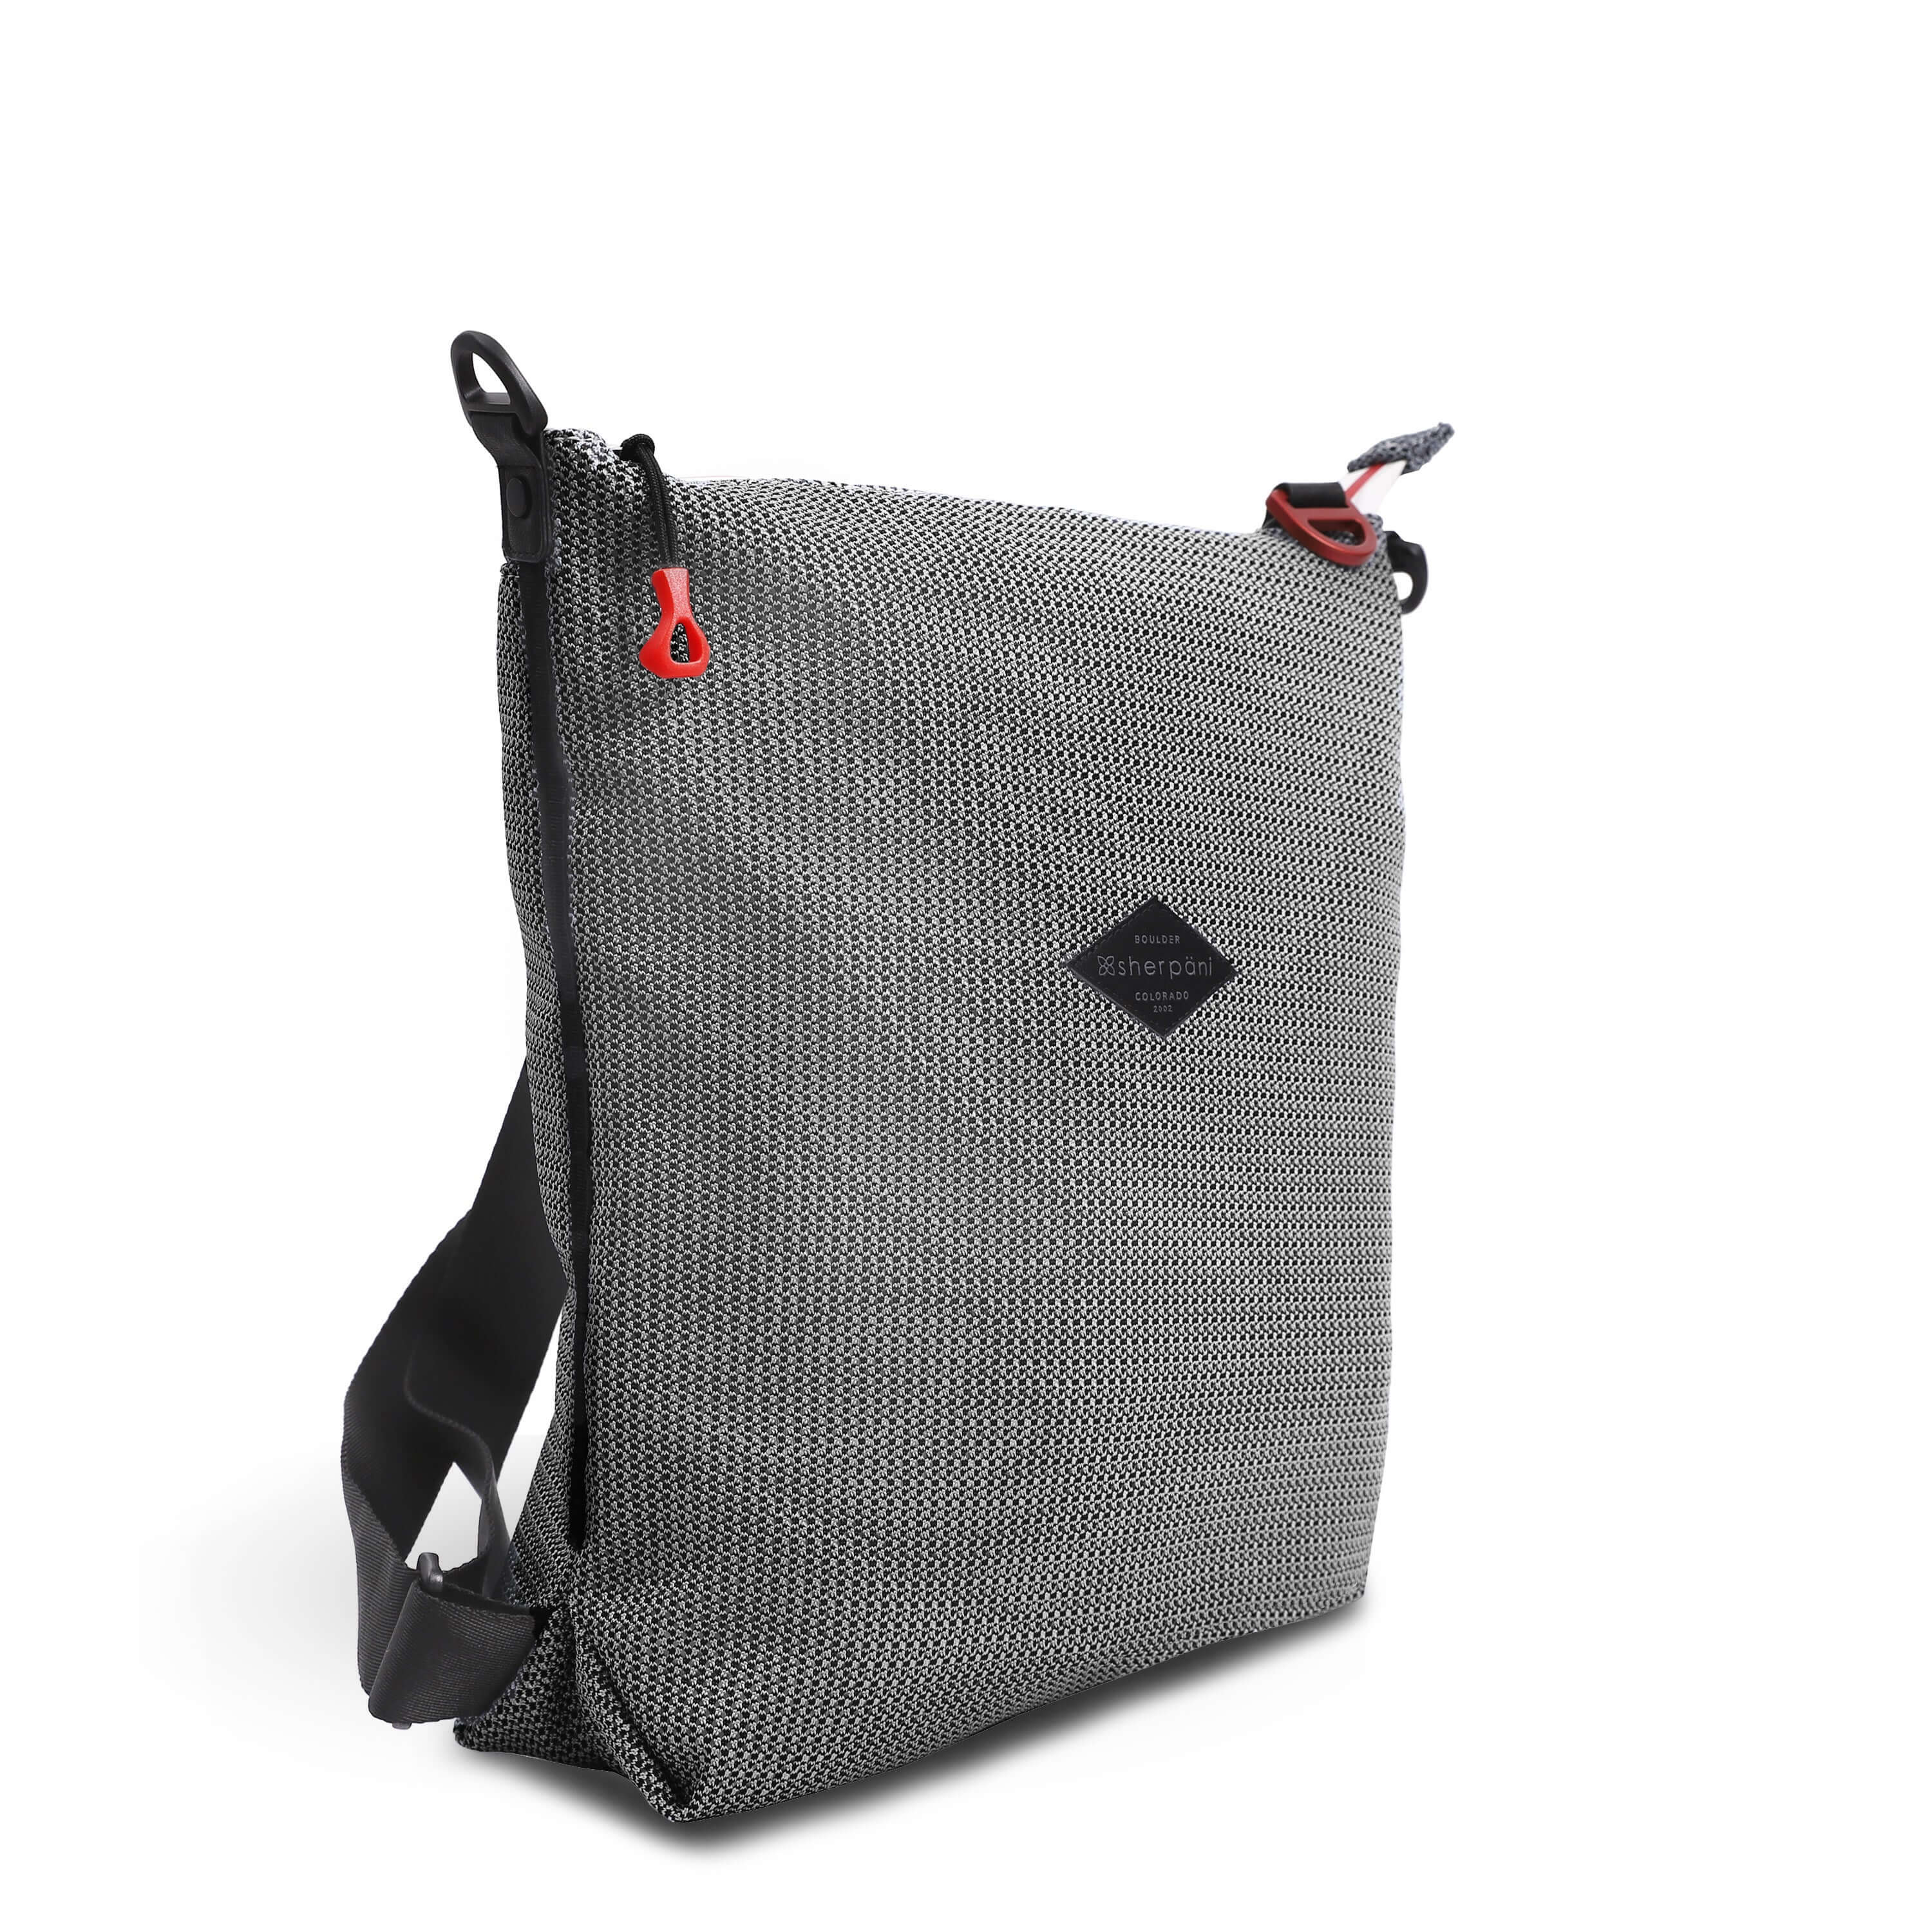 Angled front view of Sherpani convertible mesh bag, the Delanie. It has a black and white mesh pattern and features pops of red on the accent buckle and easy-pull zipper. The bag has adjustable backpack straps and an adjustable/detachable crossbody strap.